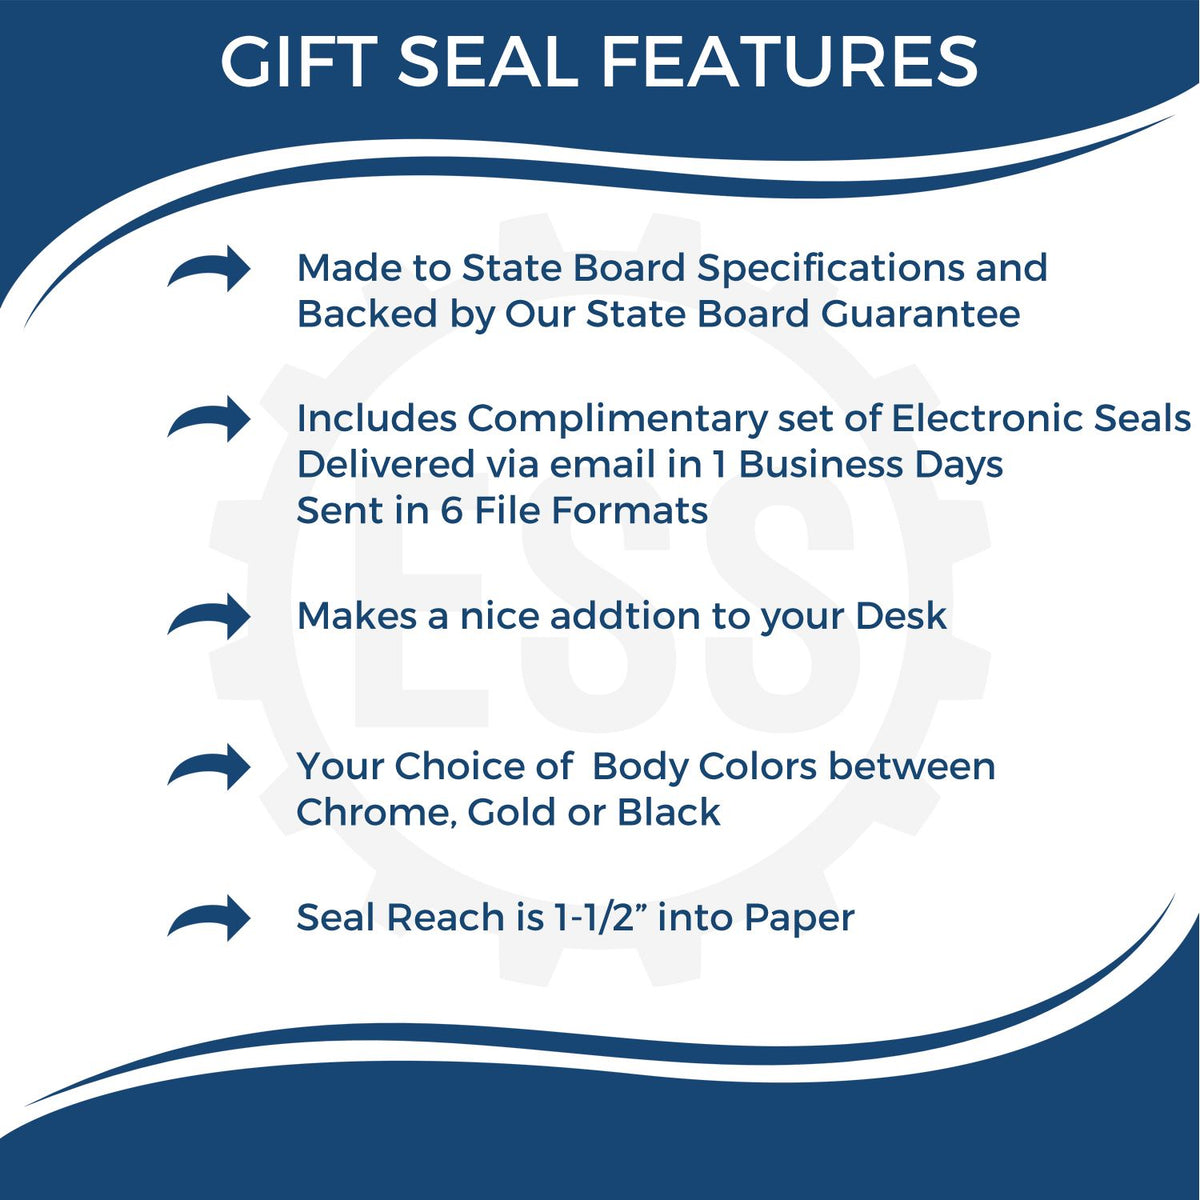 A picture of an infographic highlighting the selling points for the Gift South Carolina Geologist Seal